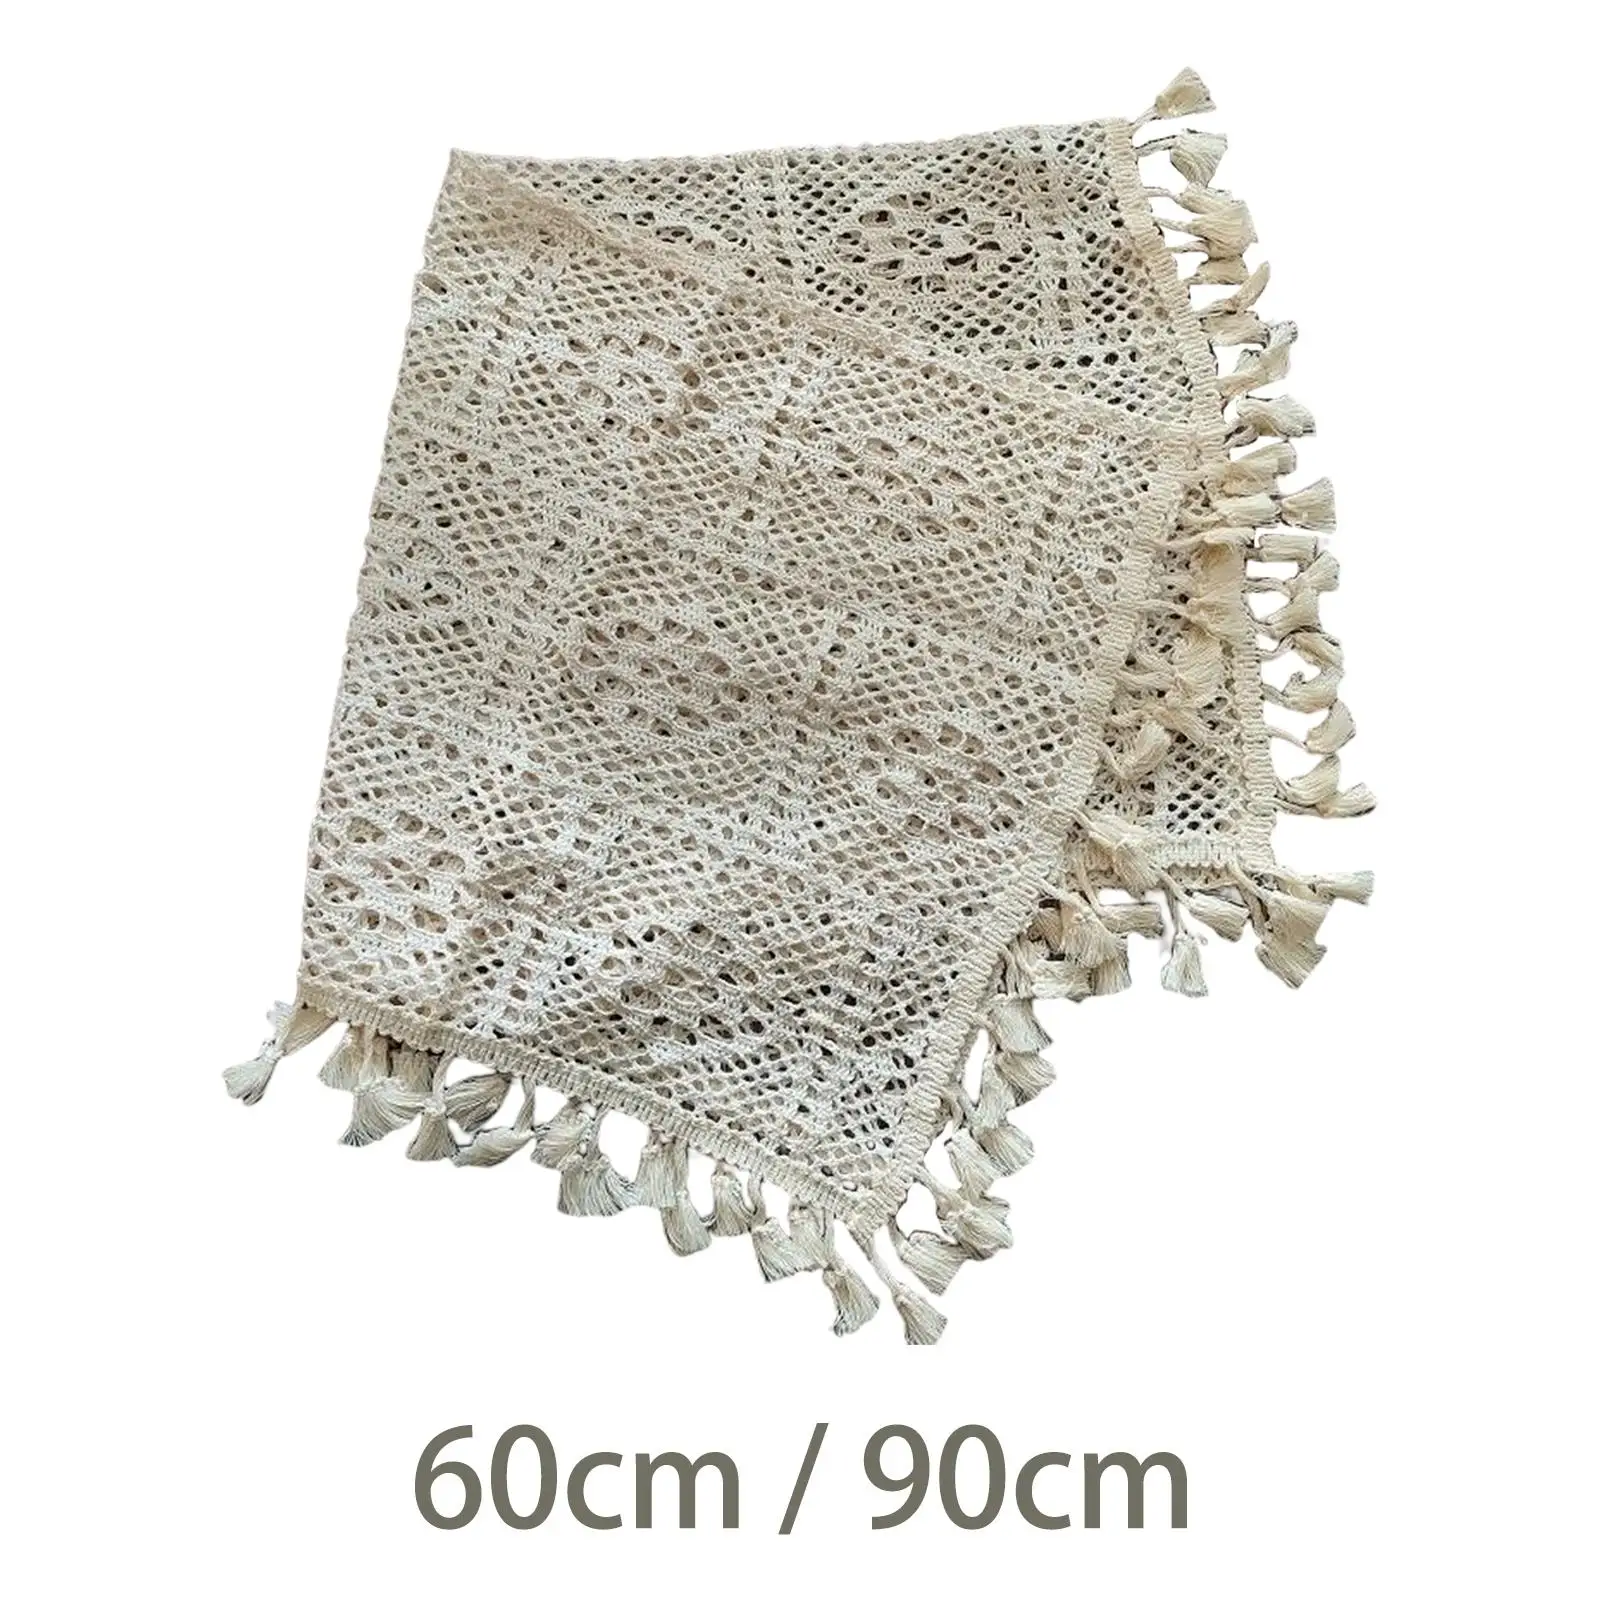 Hollow Photography Prop Blanket Cotton Decorative Photo Shooting Accessories Wrapping Towel Decor Lightweight Tassel Blanket